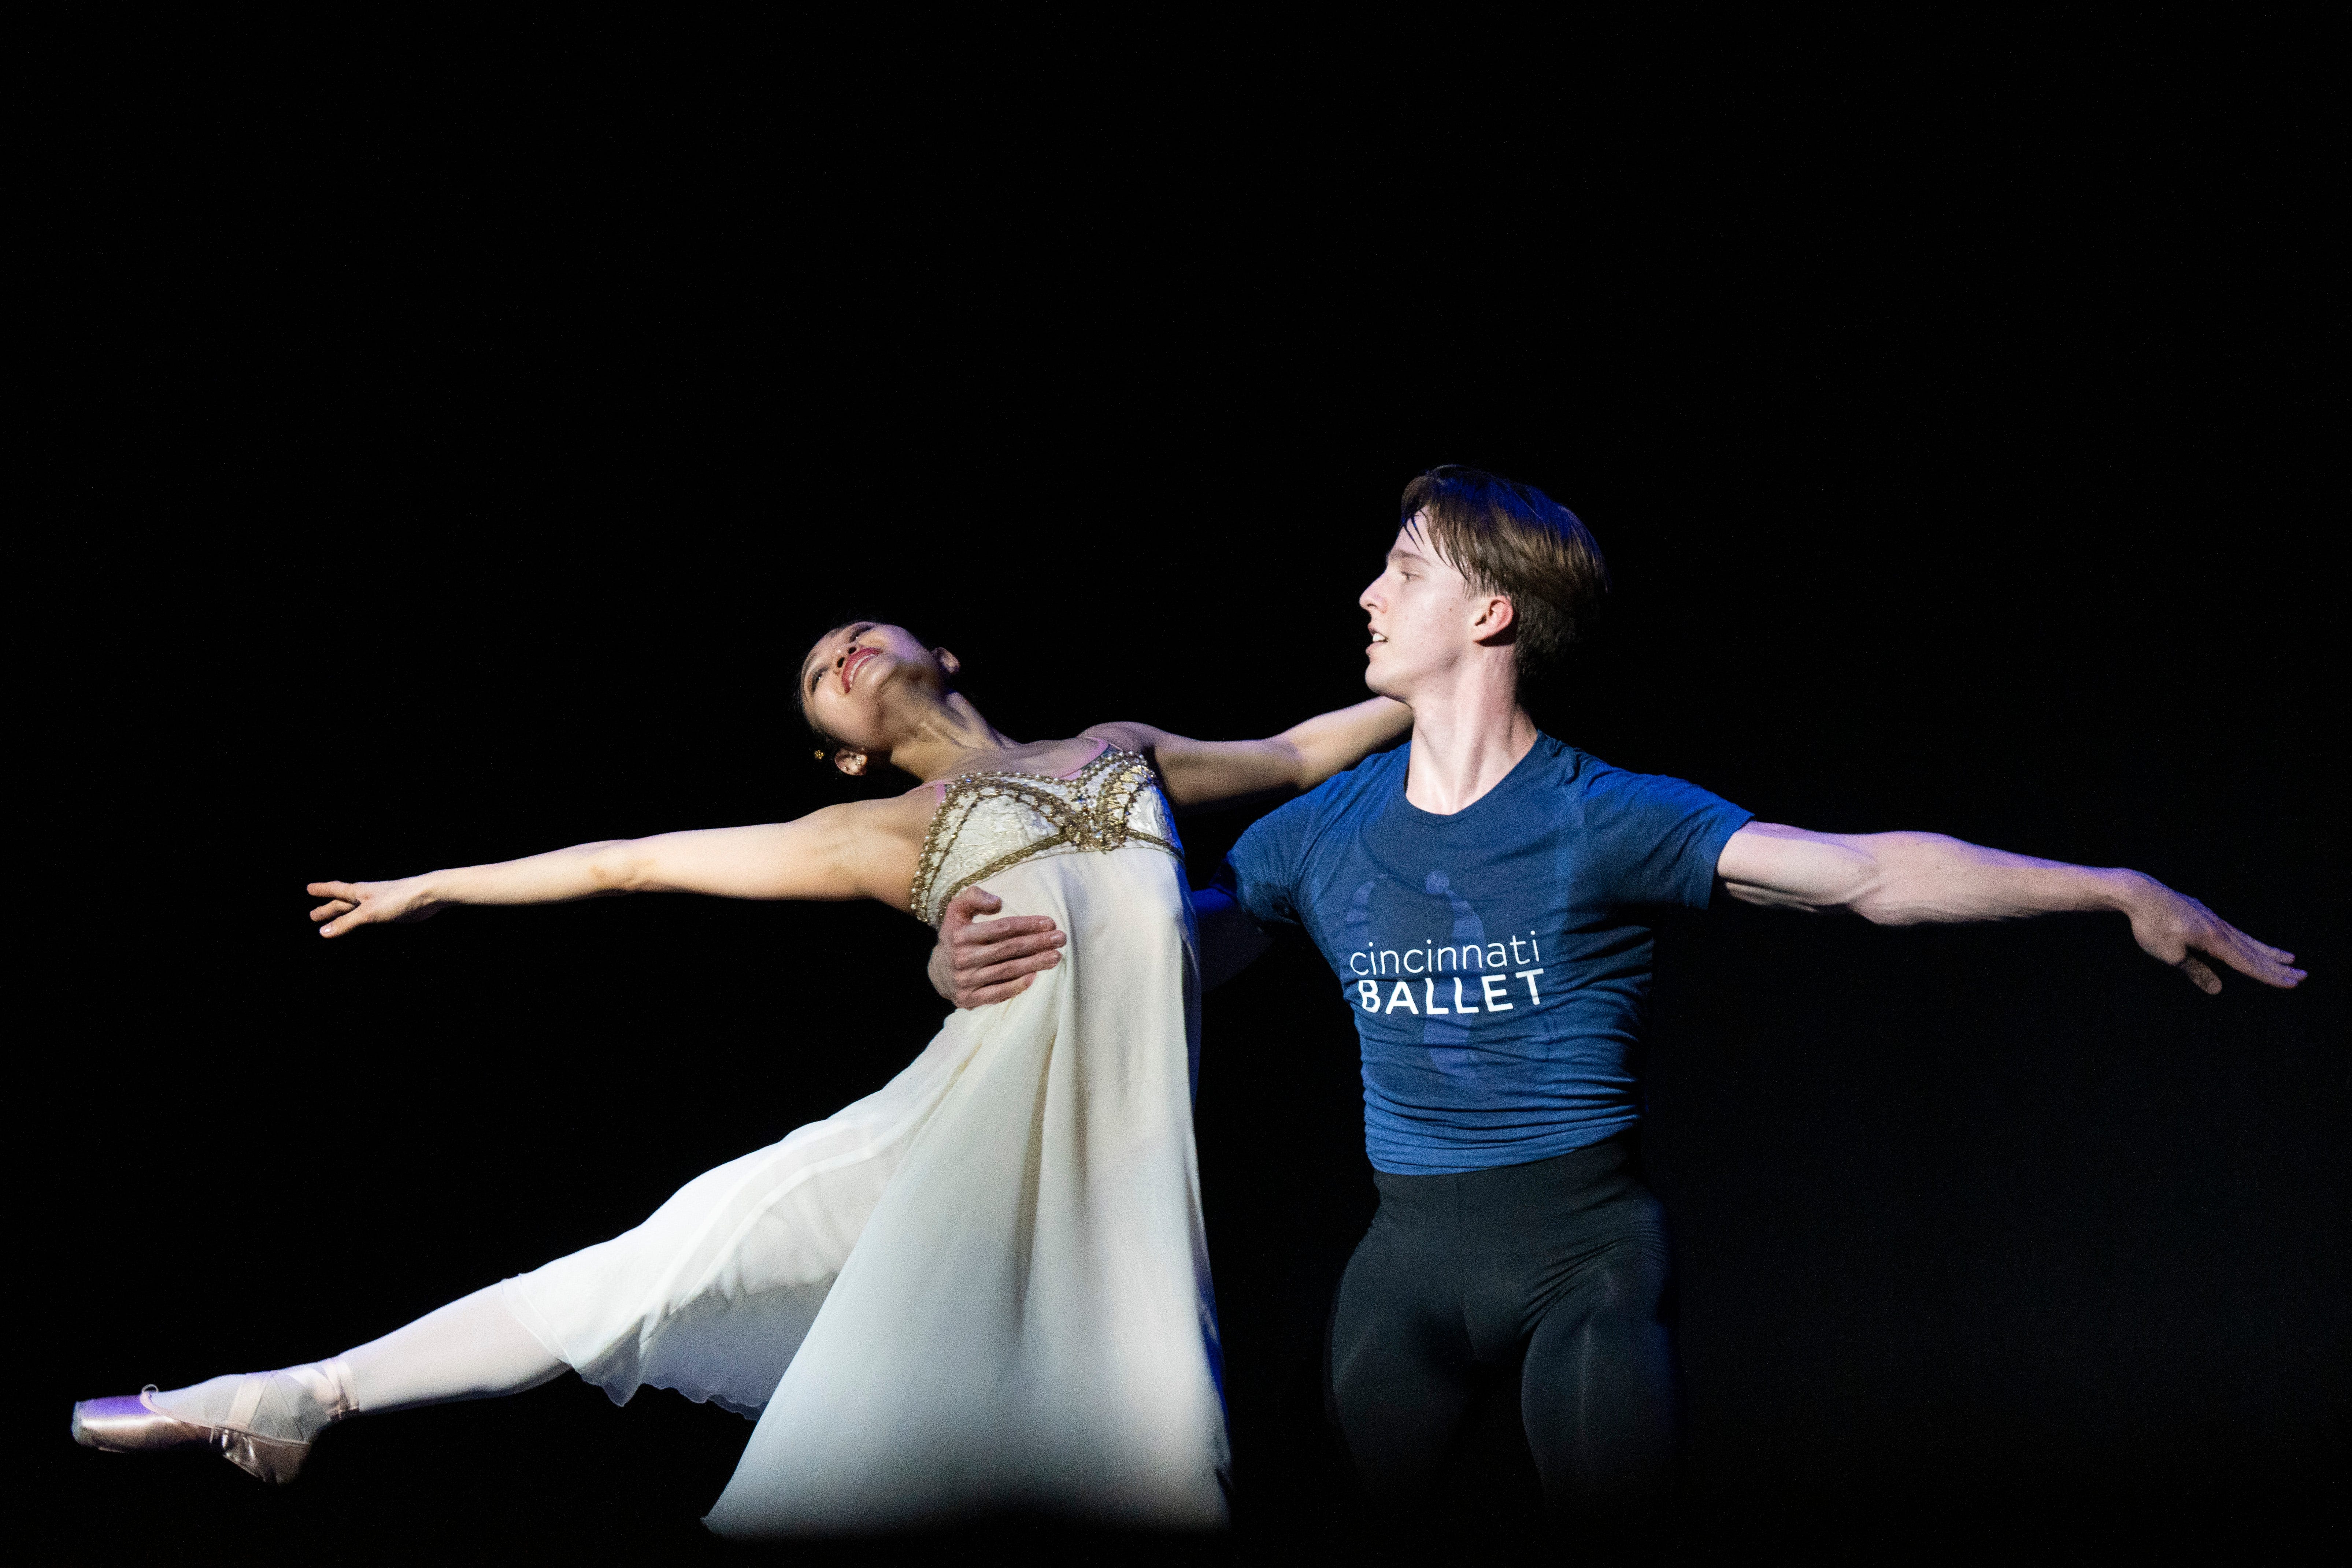 A performance 30 years ago inspired Indianapolis' 'Romeo and Juliet' ballet